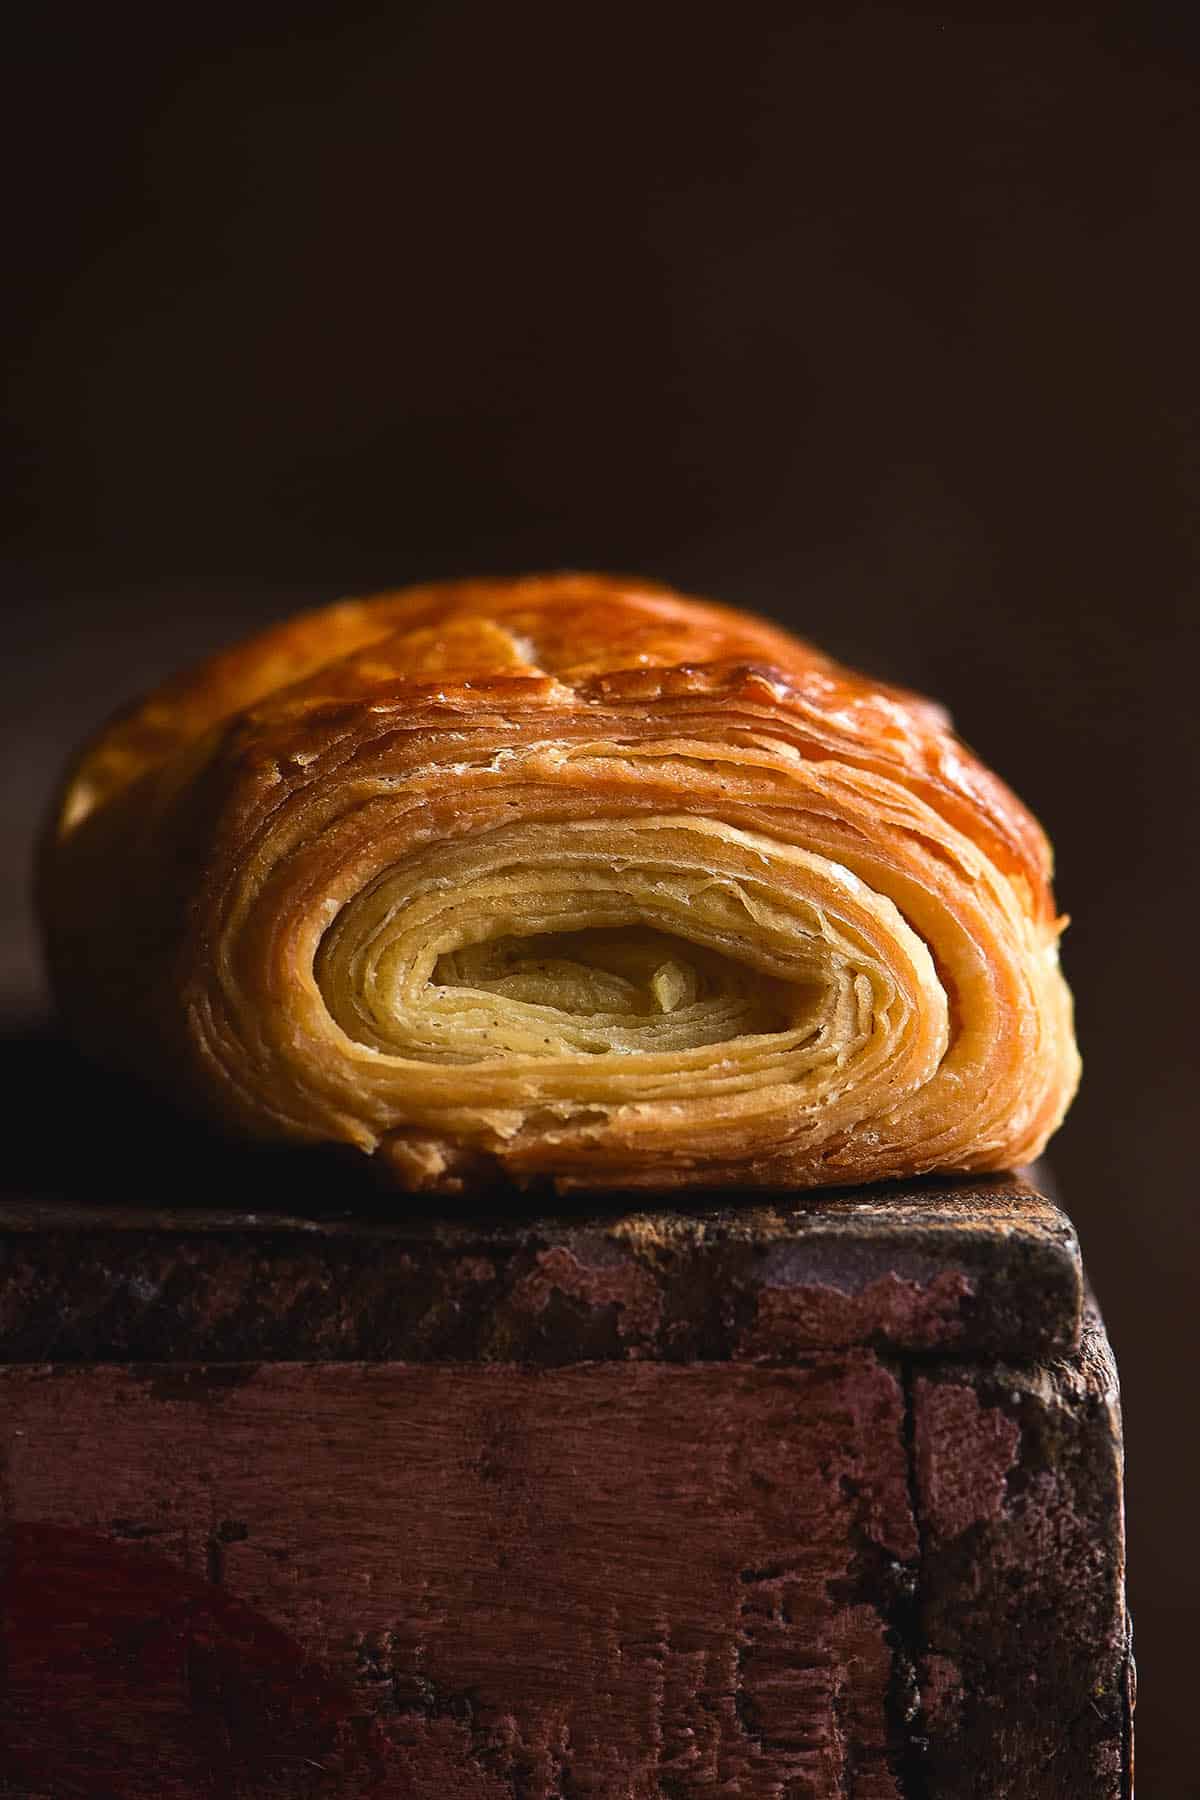 A moody macro side on shot of a gluten free pain au chocolat. The pastry sits on a wooden backdrop with faint pink paint on the side facing the camera. The backdrop is a dark, deep rusty colour which contrasts with the light golden colour of the pastry. The shot focuses on the flaky swirl of layers.